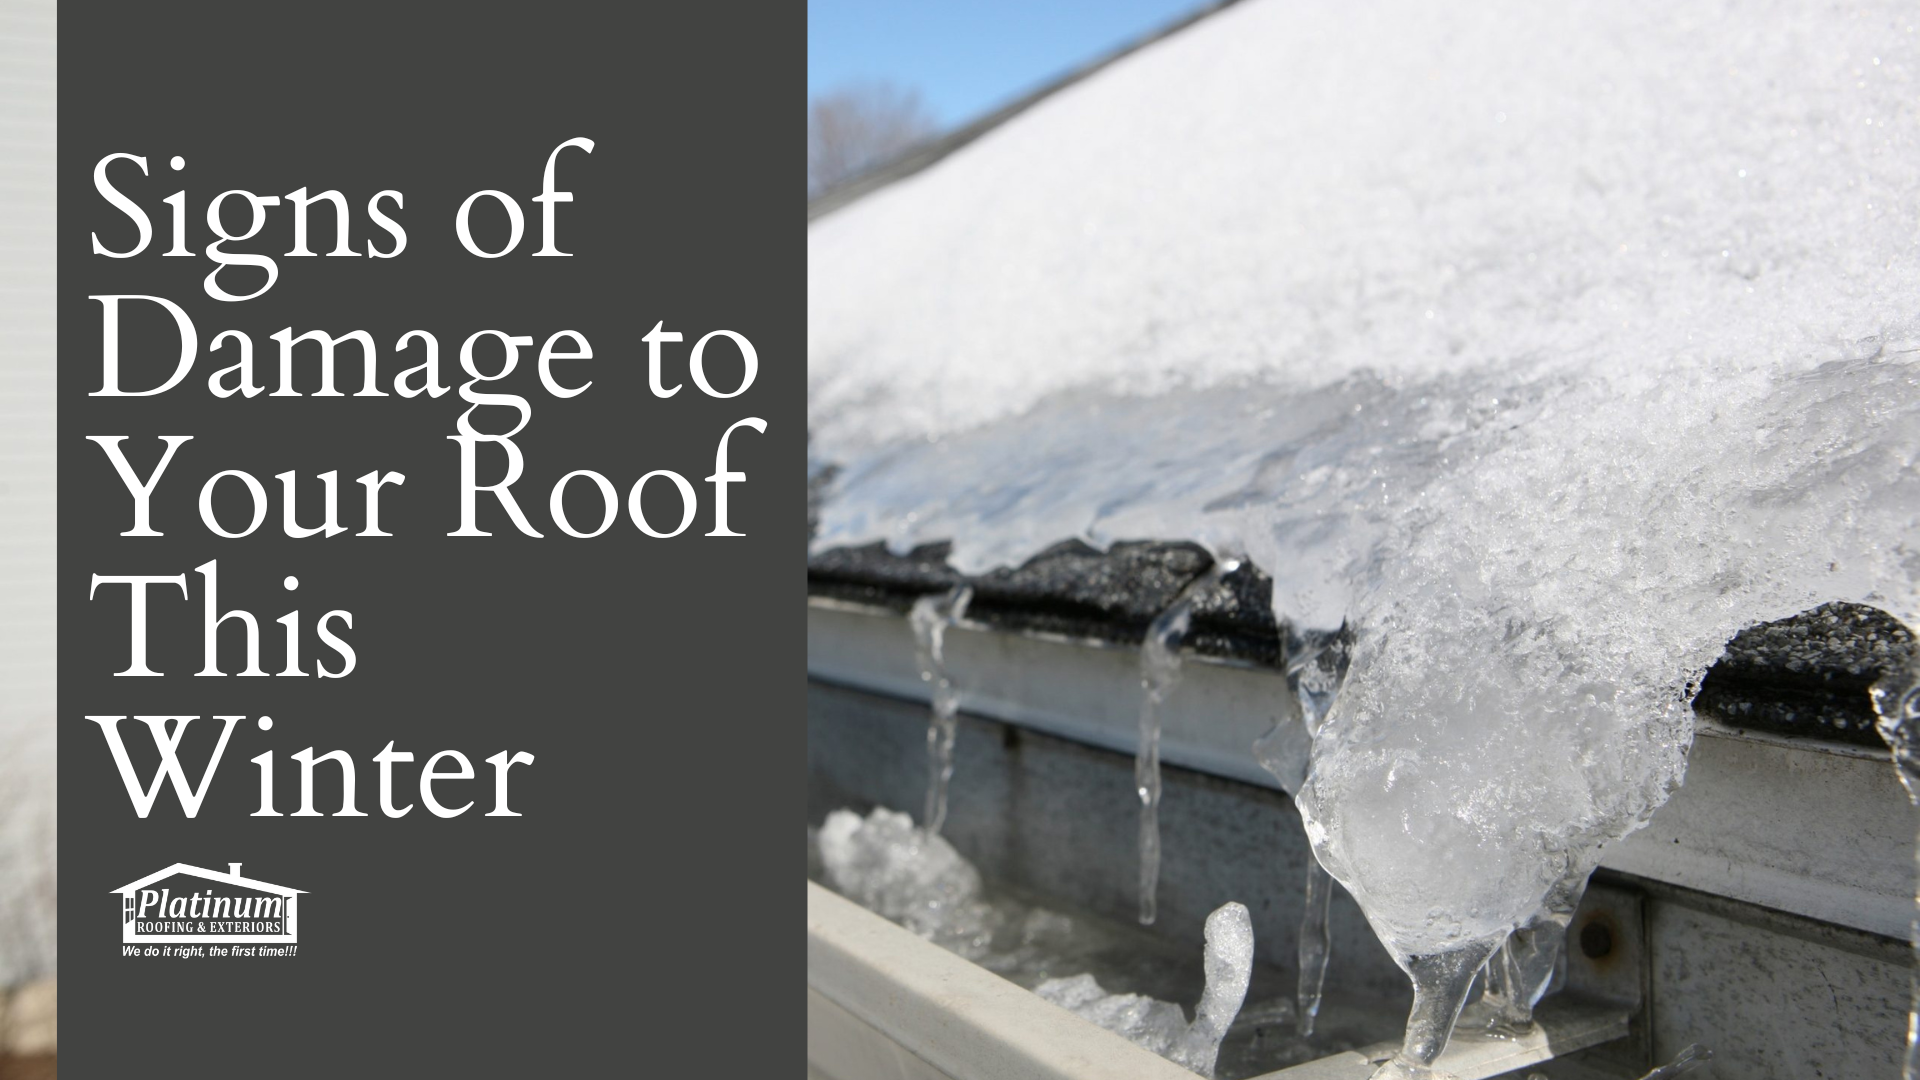 signs of damage to your roof this winter by platinum roofing & exteriors